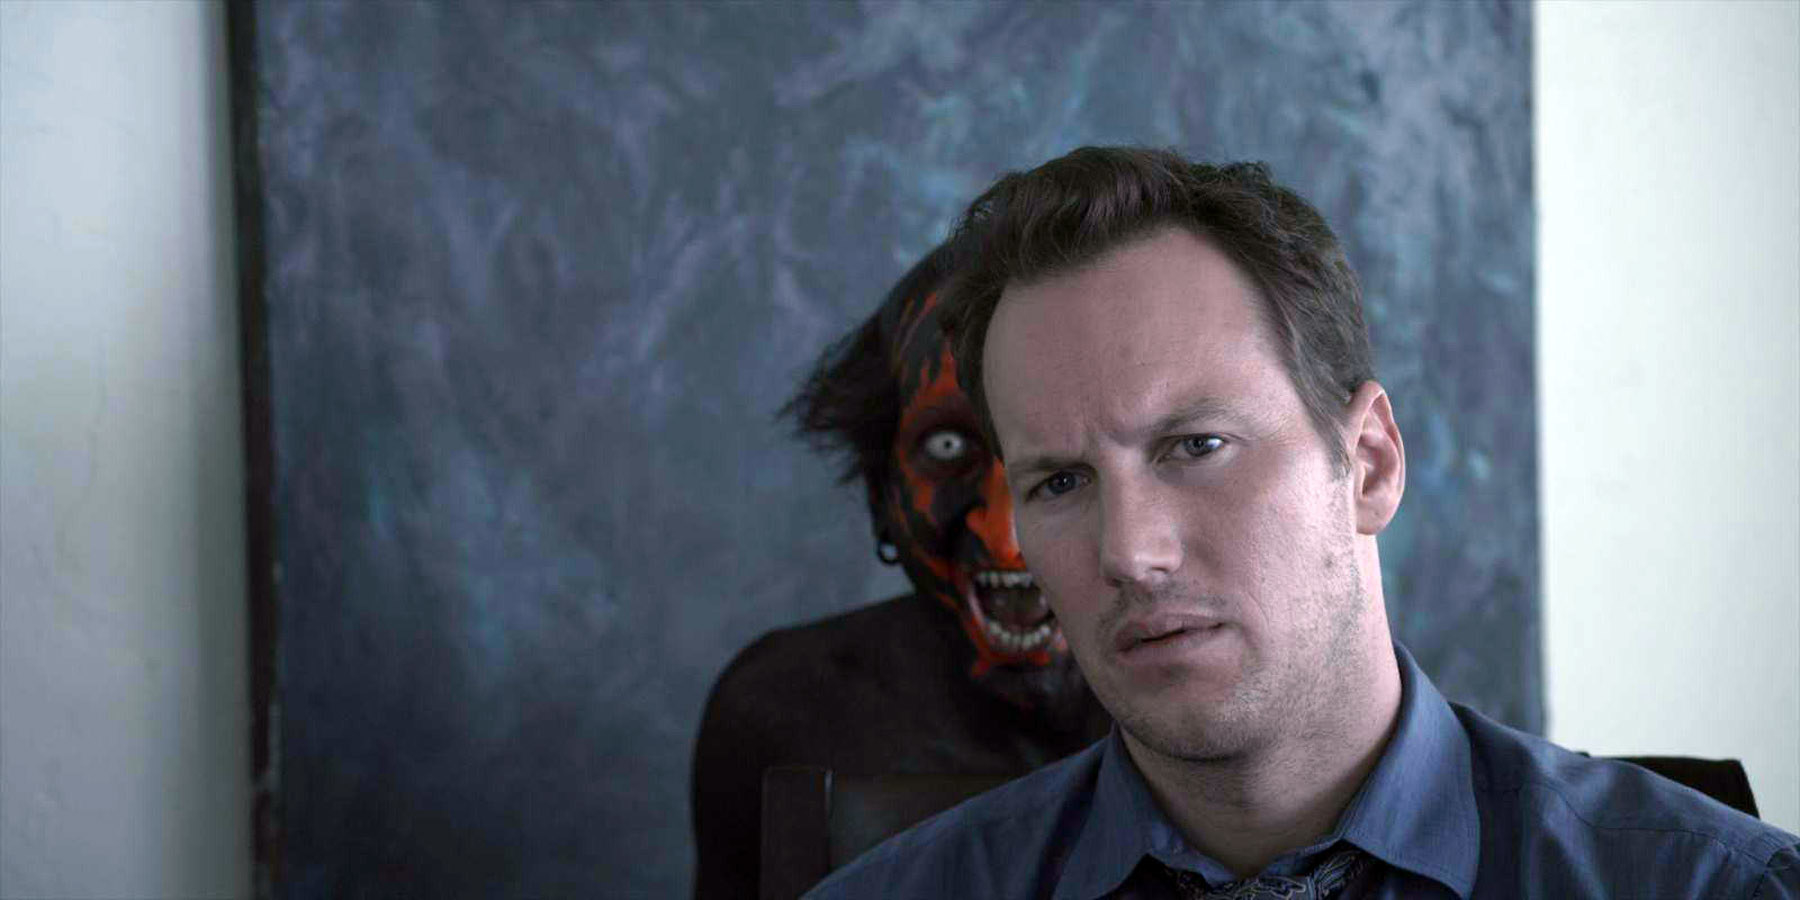 A creature in red face paint lurks behind a seated man